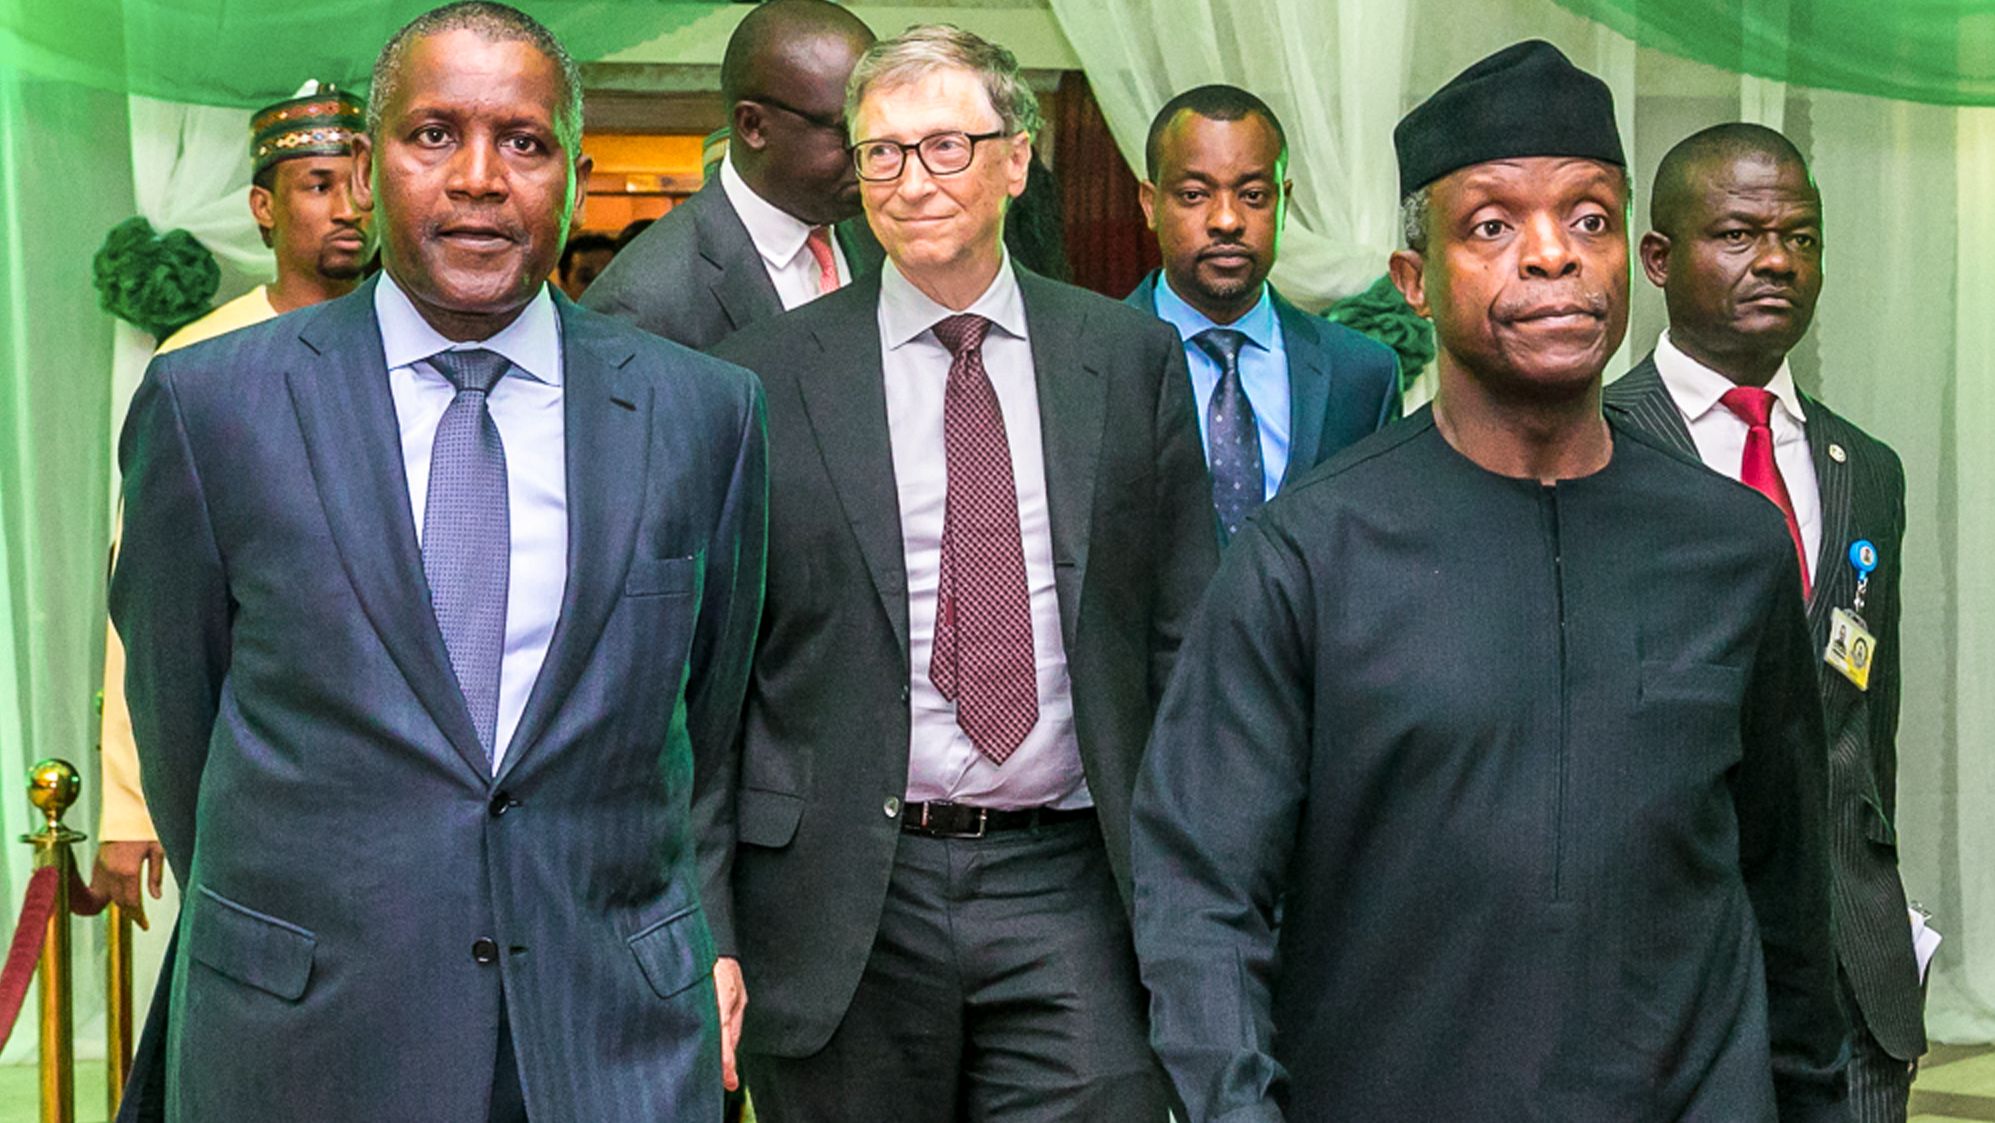 Bill Gates urges Nigeria’s leaders to do more to help ordinary people amid economic reforms